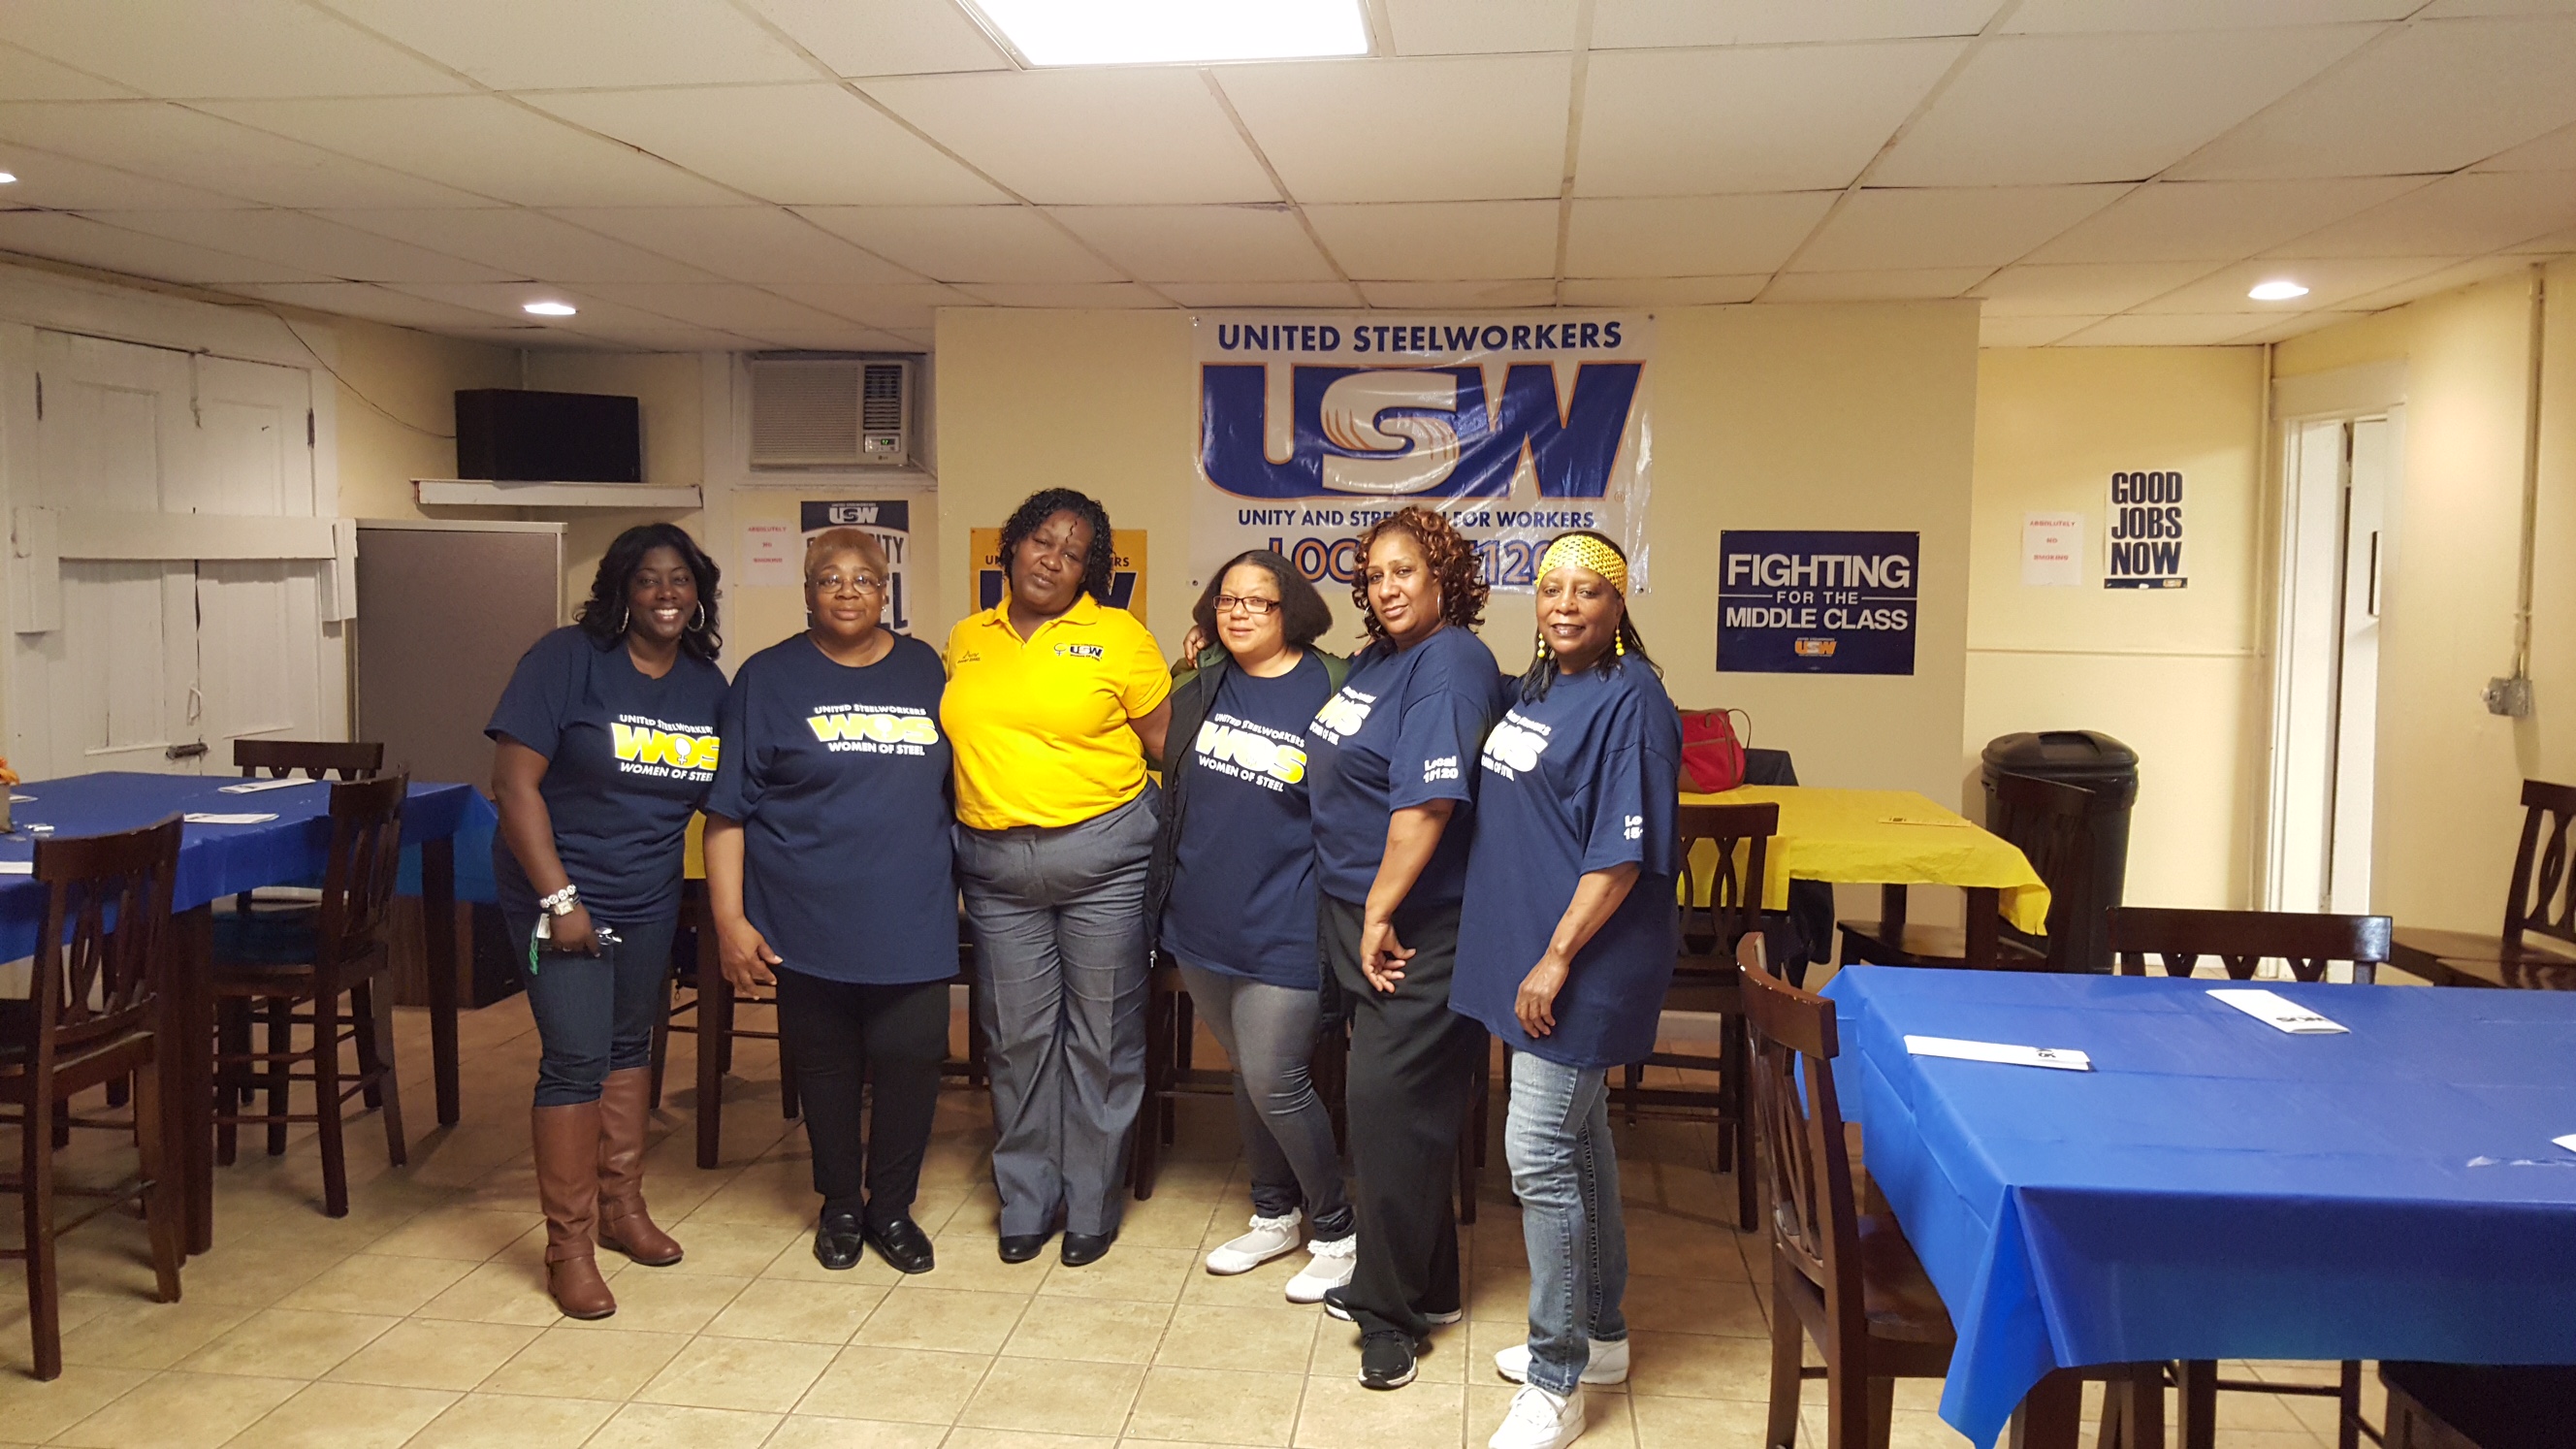 USW Local 15120 Women of Steel members with guest speaker Diane Leslie from USW Local 1155L